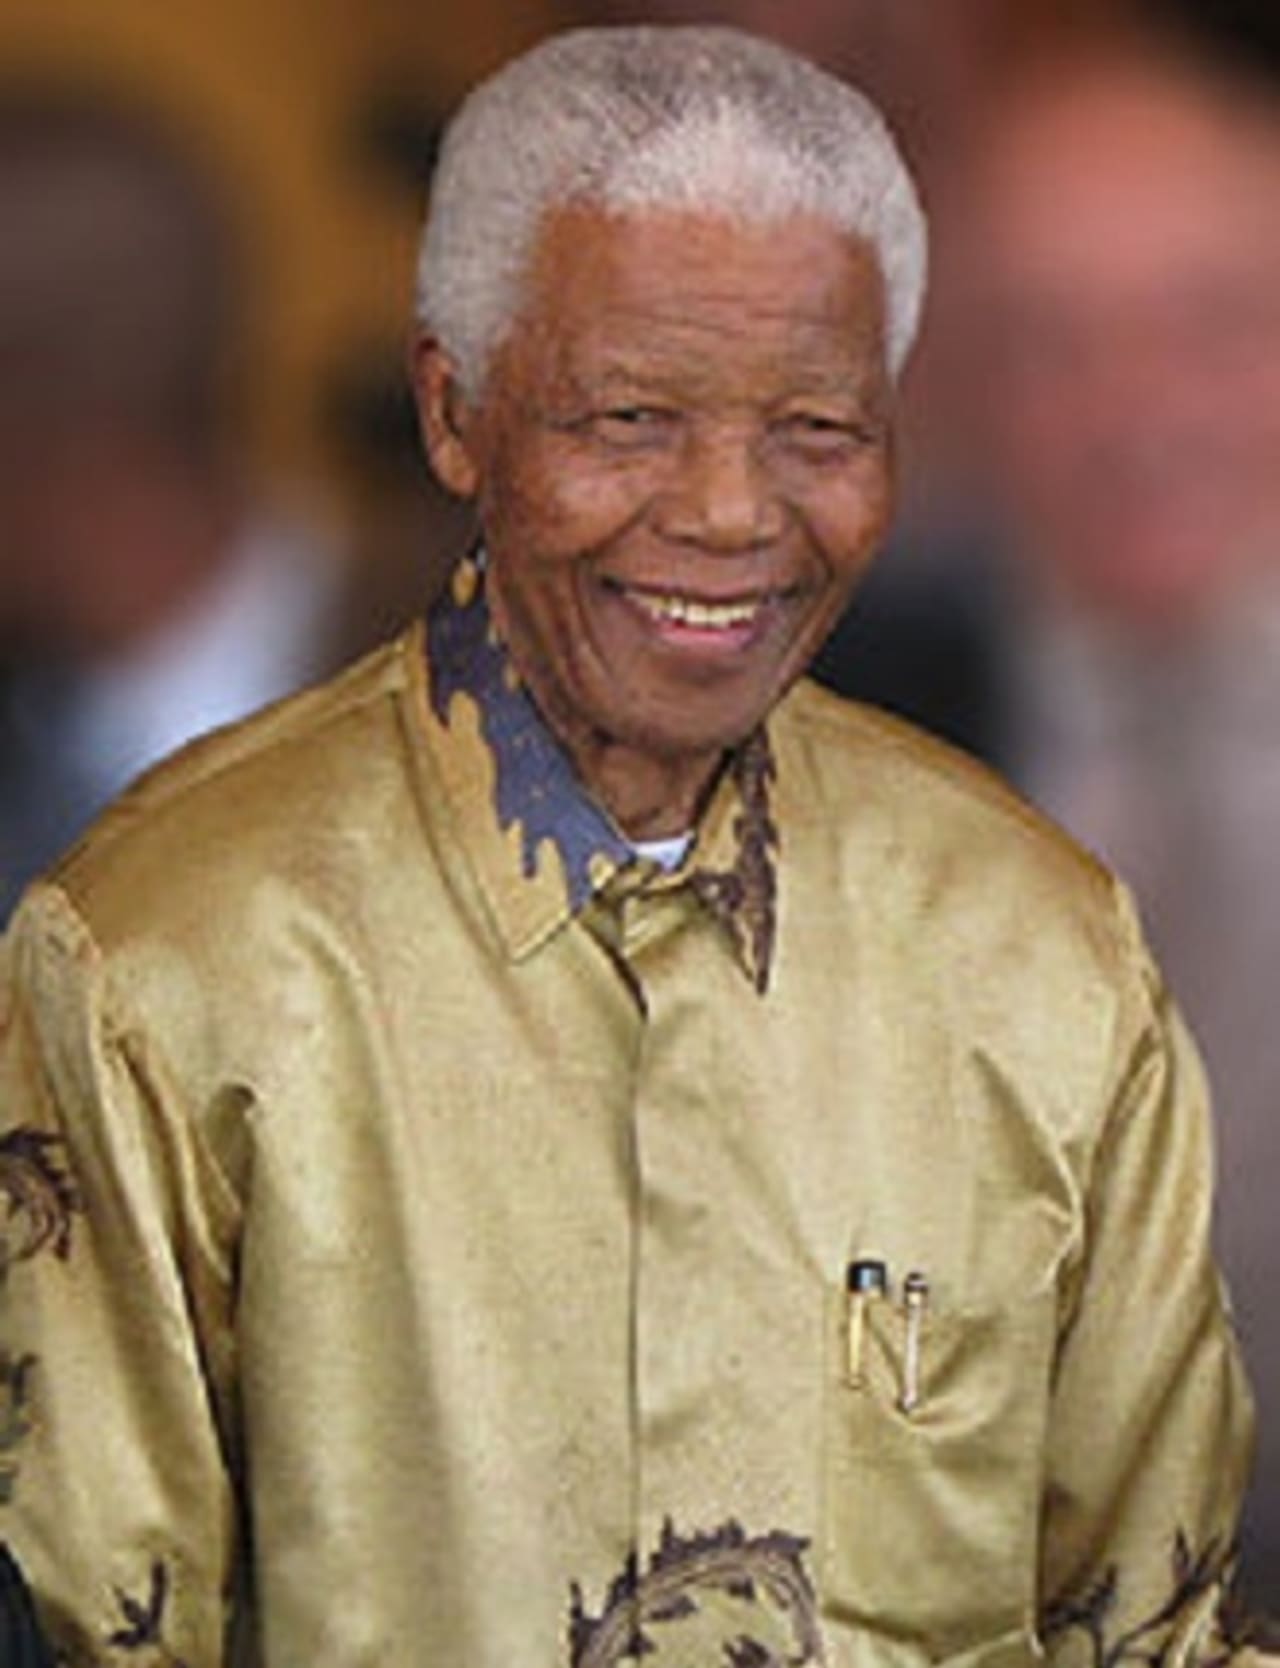 Norwalk Community College plans to honor Nelson Mandela with a food drive through July 18, then a special screening that day of a movie based on Mandela's life.